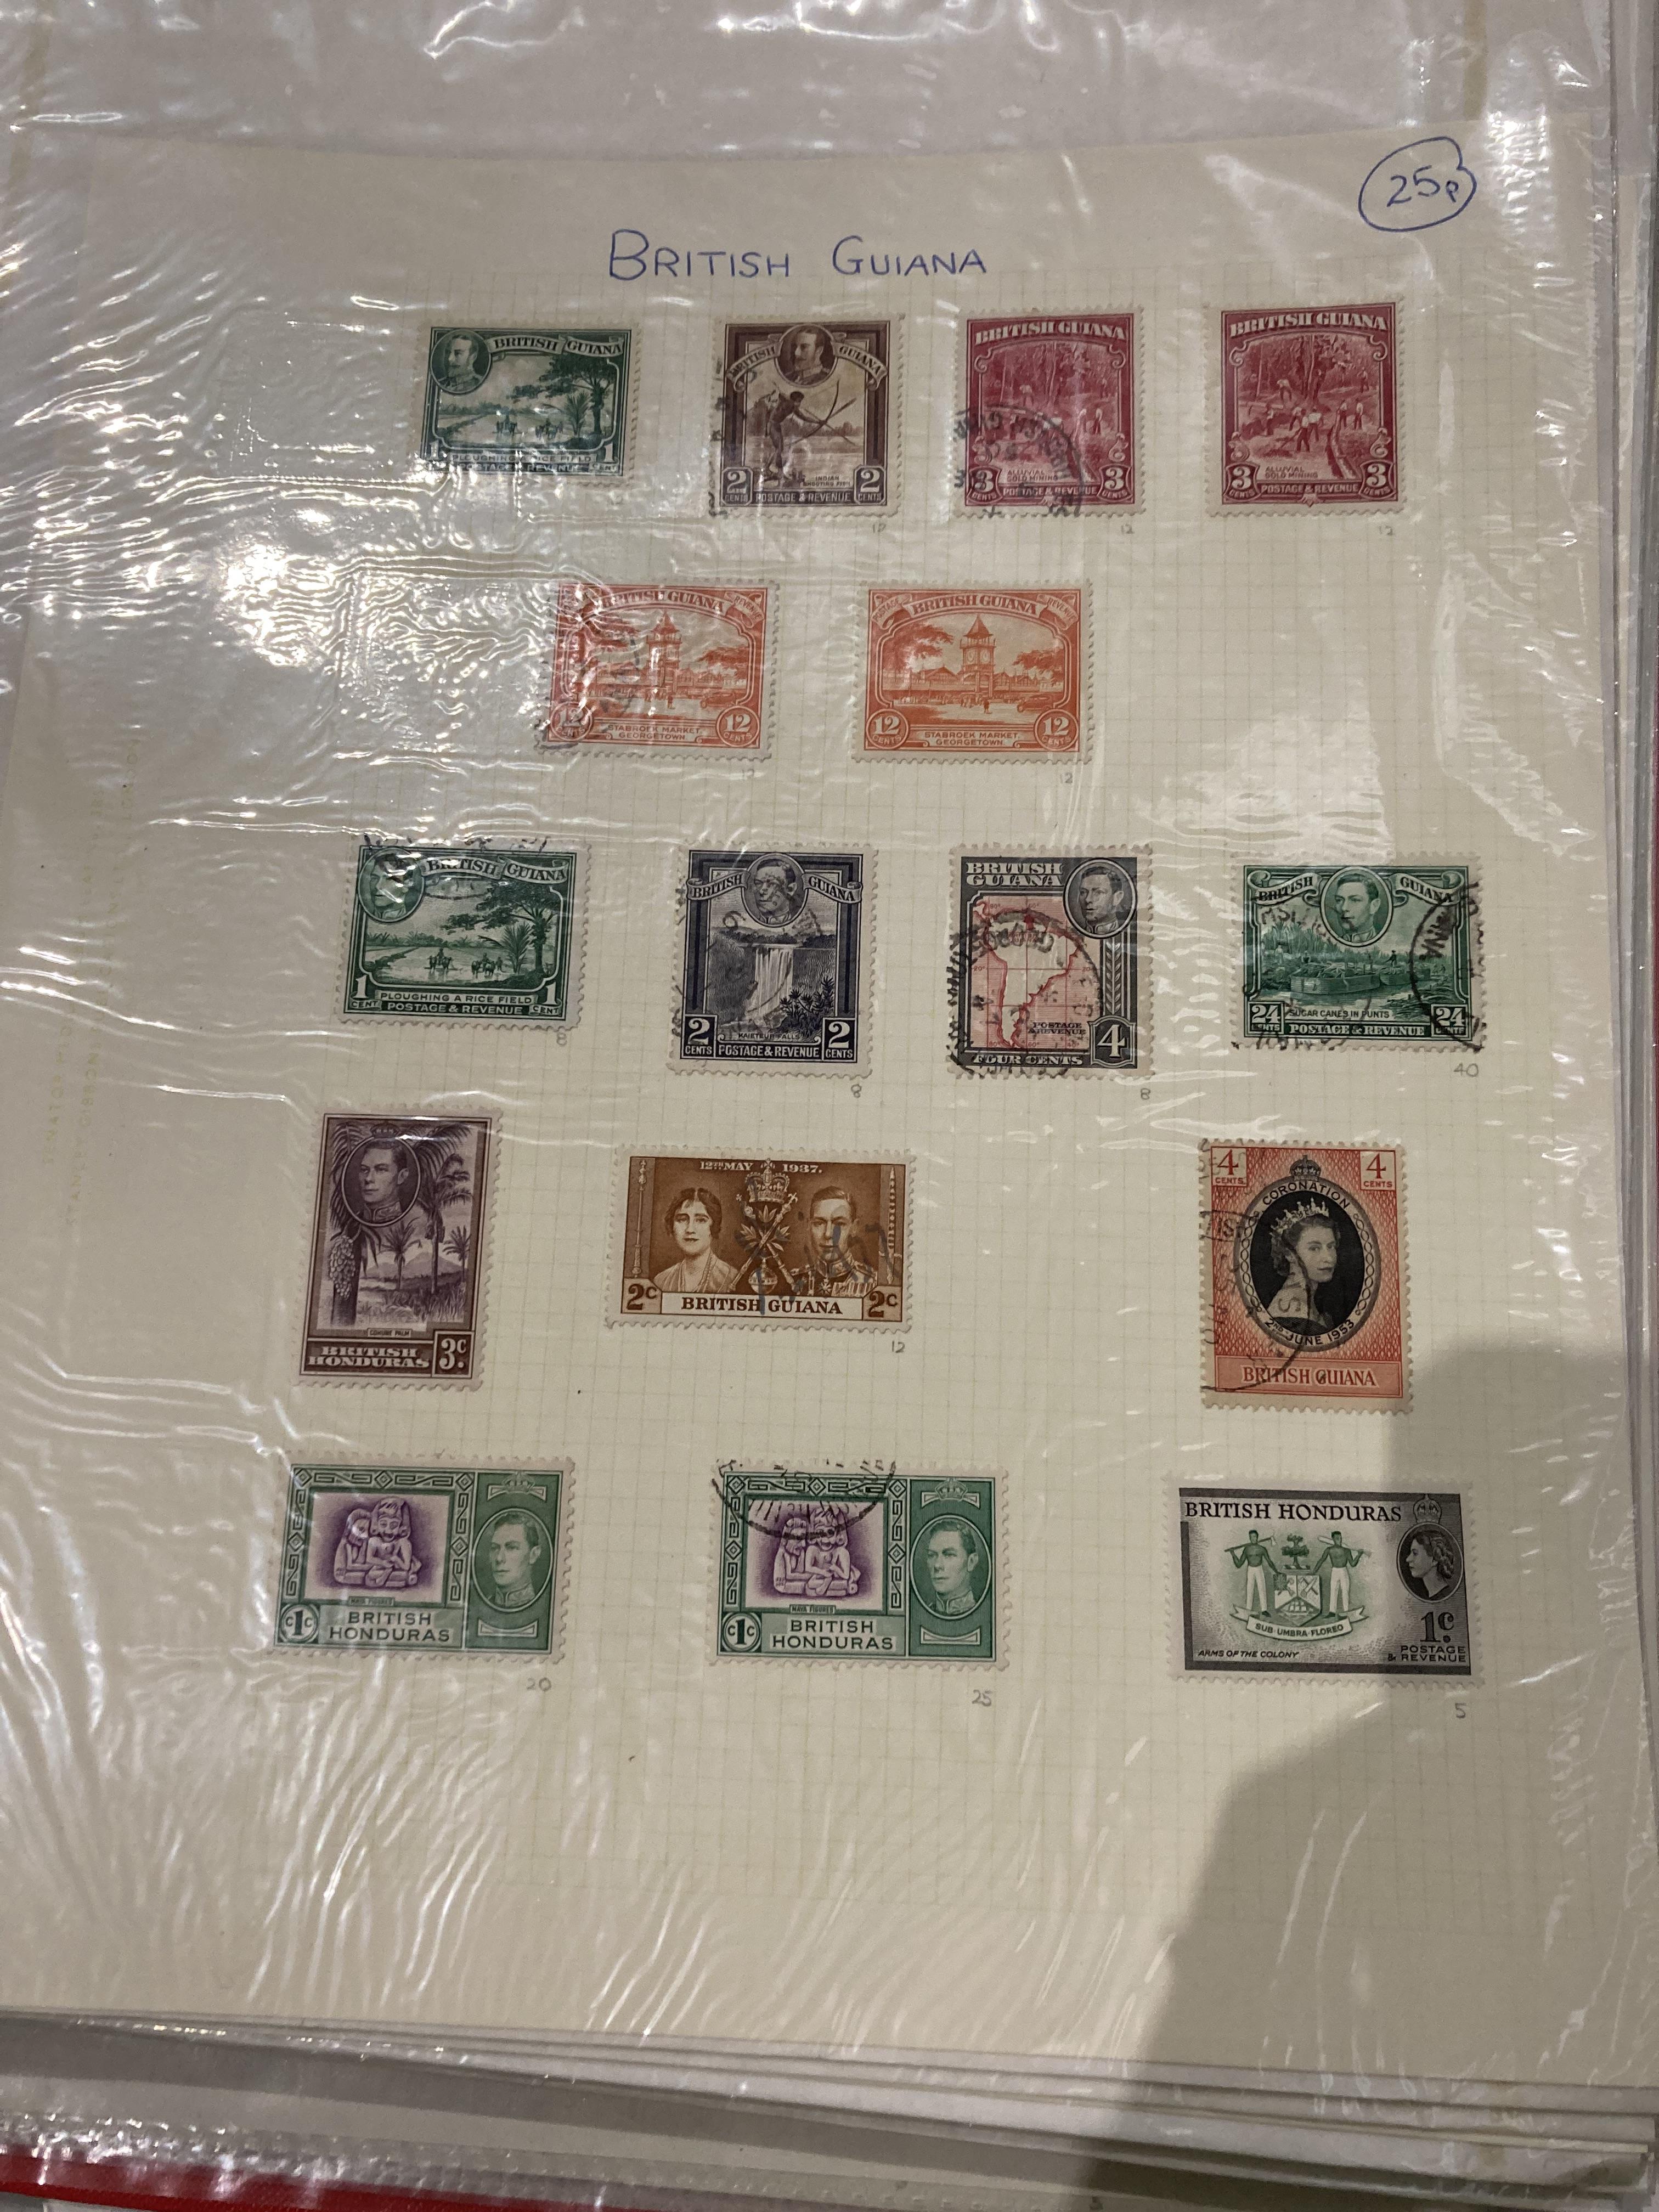 Seven stamp albums and contents - stamps from GB, - Image 7 of 15